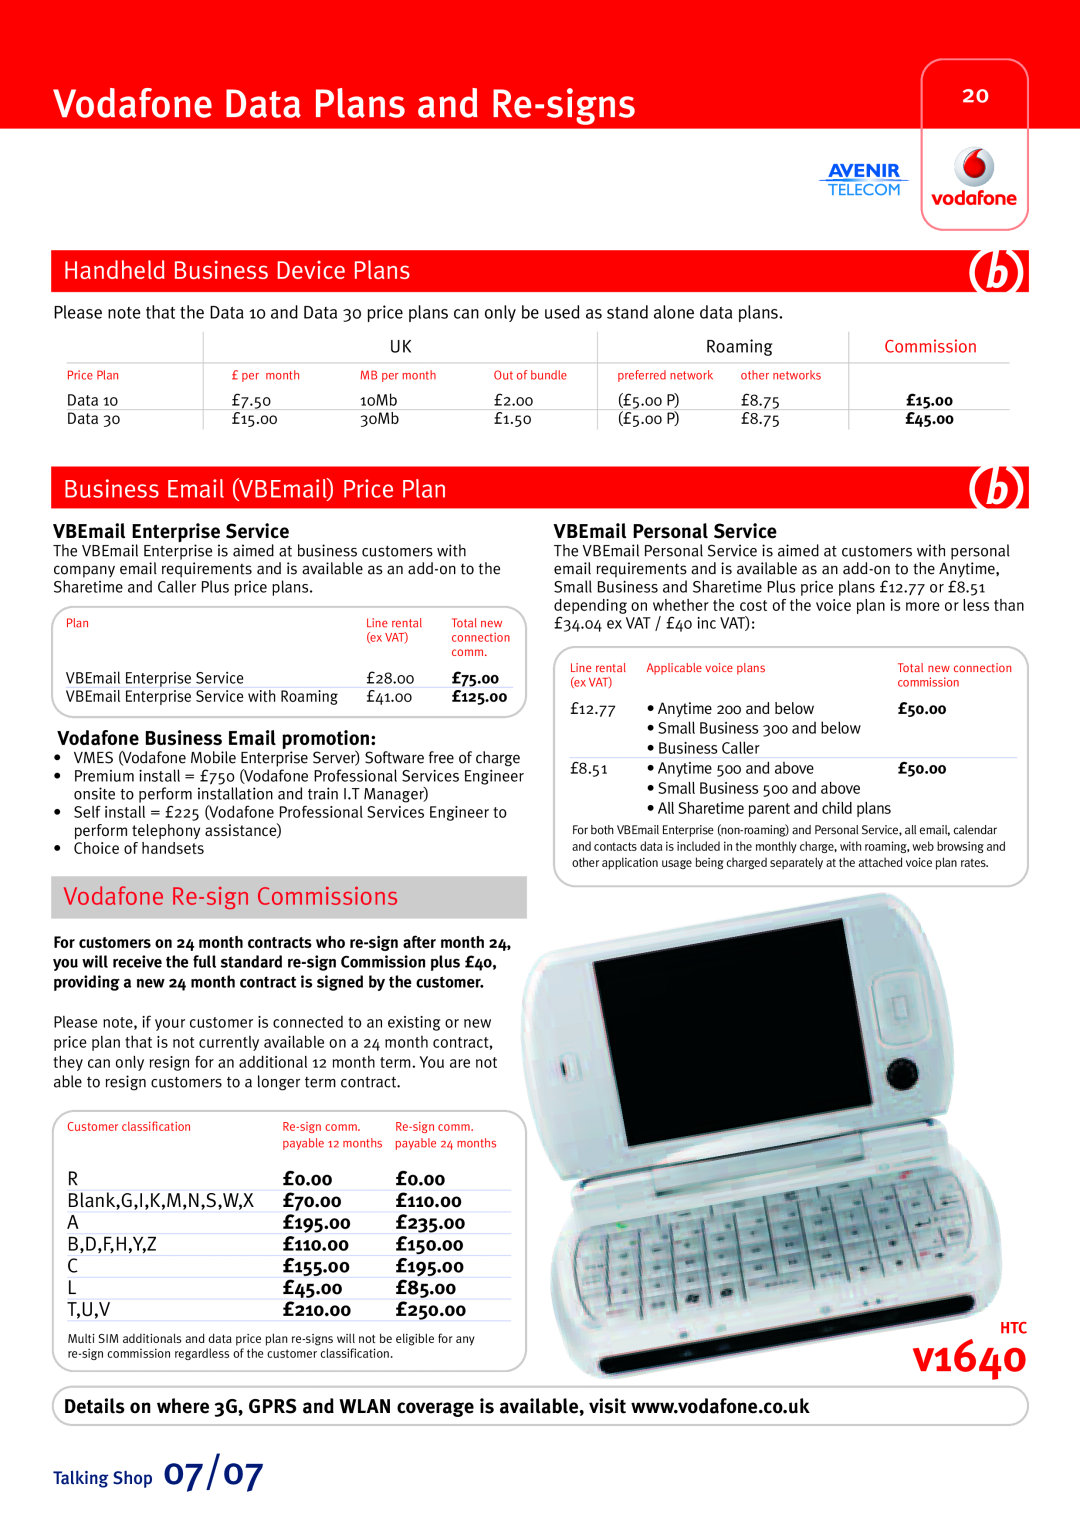 Sony Ericsson W580i Vodafone Data Plans and Re-signs, Handheld Business Device Plans, Business Email VBEmail Price Plan 